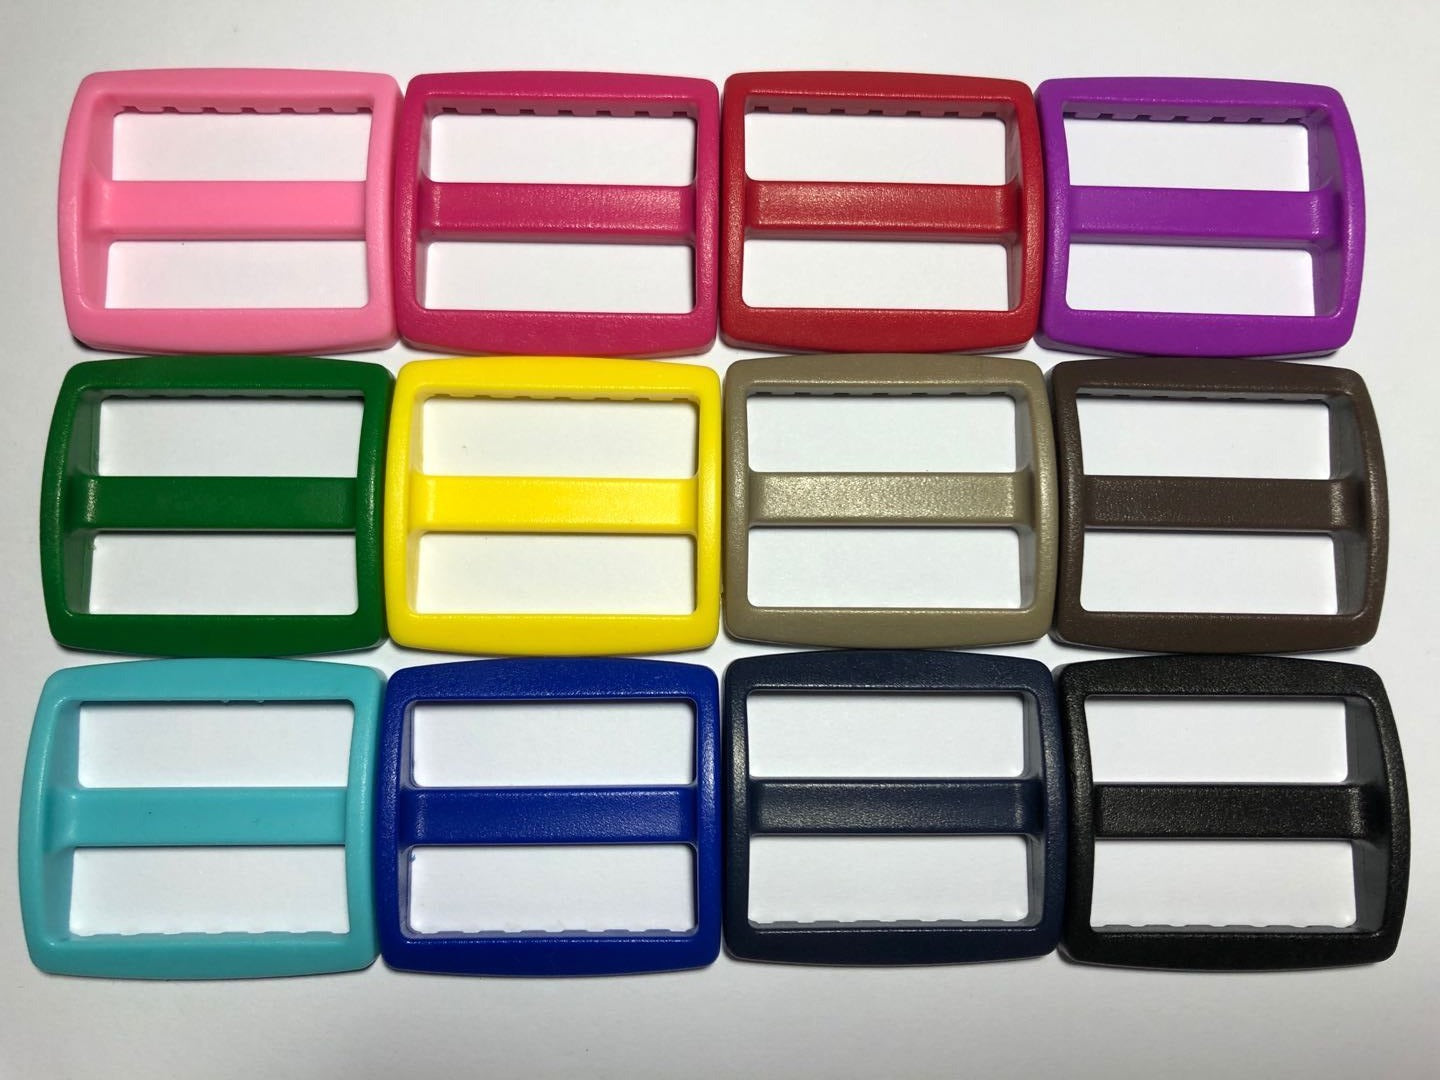 25/100x 1.5'' (38mm) Wide Mouth Plastic Triglides Webbing Slides -12 Colors